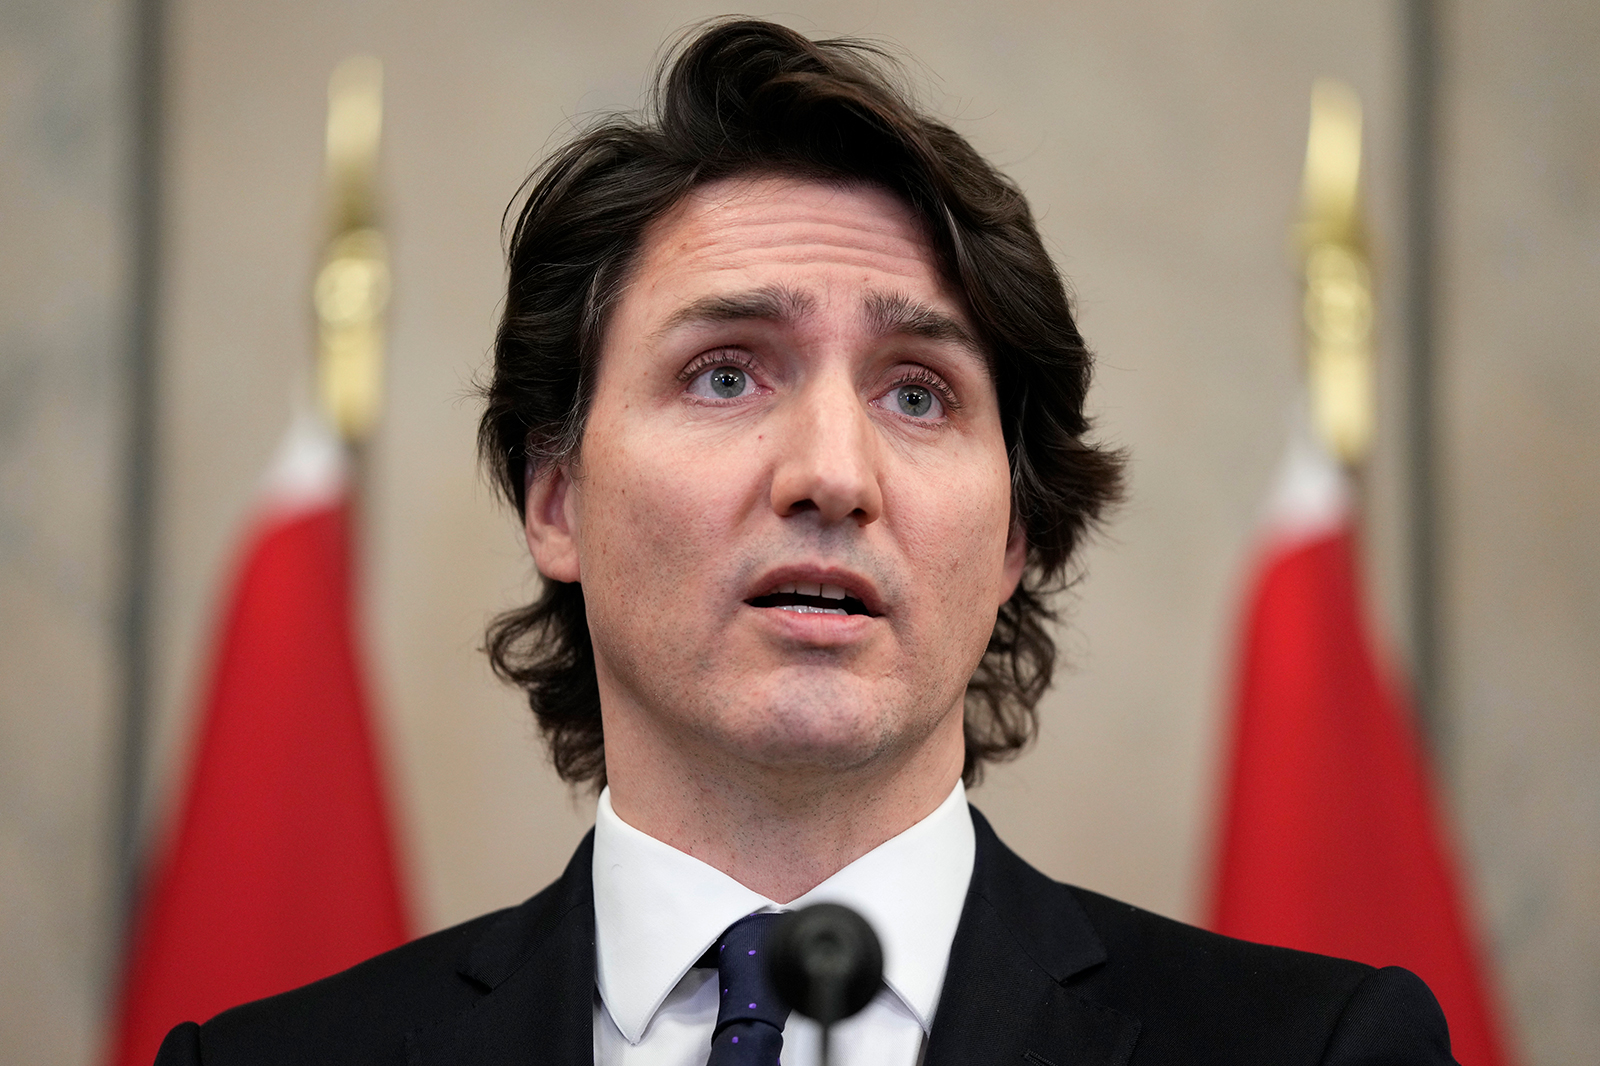 Canadian Prime Minister Justin Trudeau speaks during a media availability in Ottawa, Ontario, on February 11.